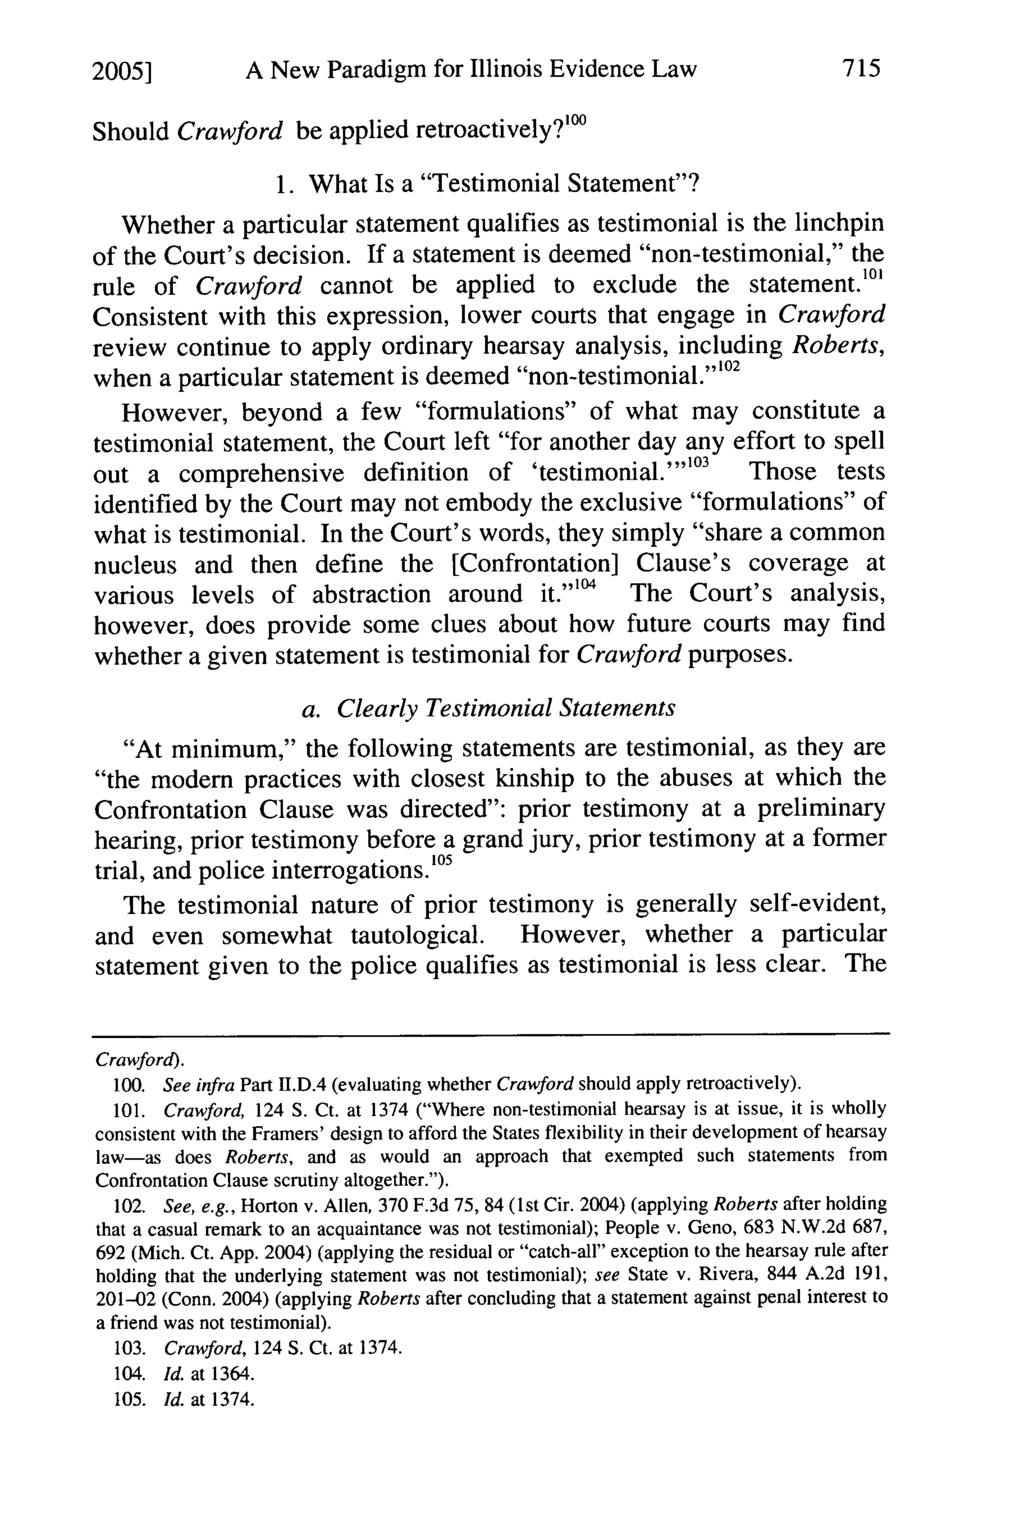 20051 A New Paradigm for Illinois Evidence Law Should Crawford be applied retroactively?' 1. What Is a "Testimonial Statement"?